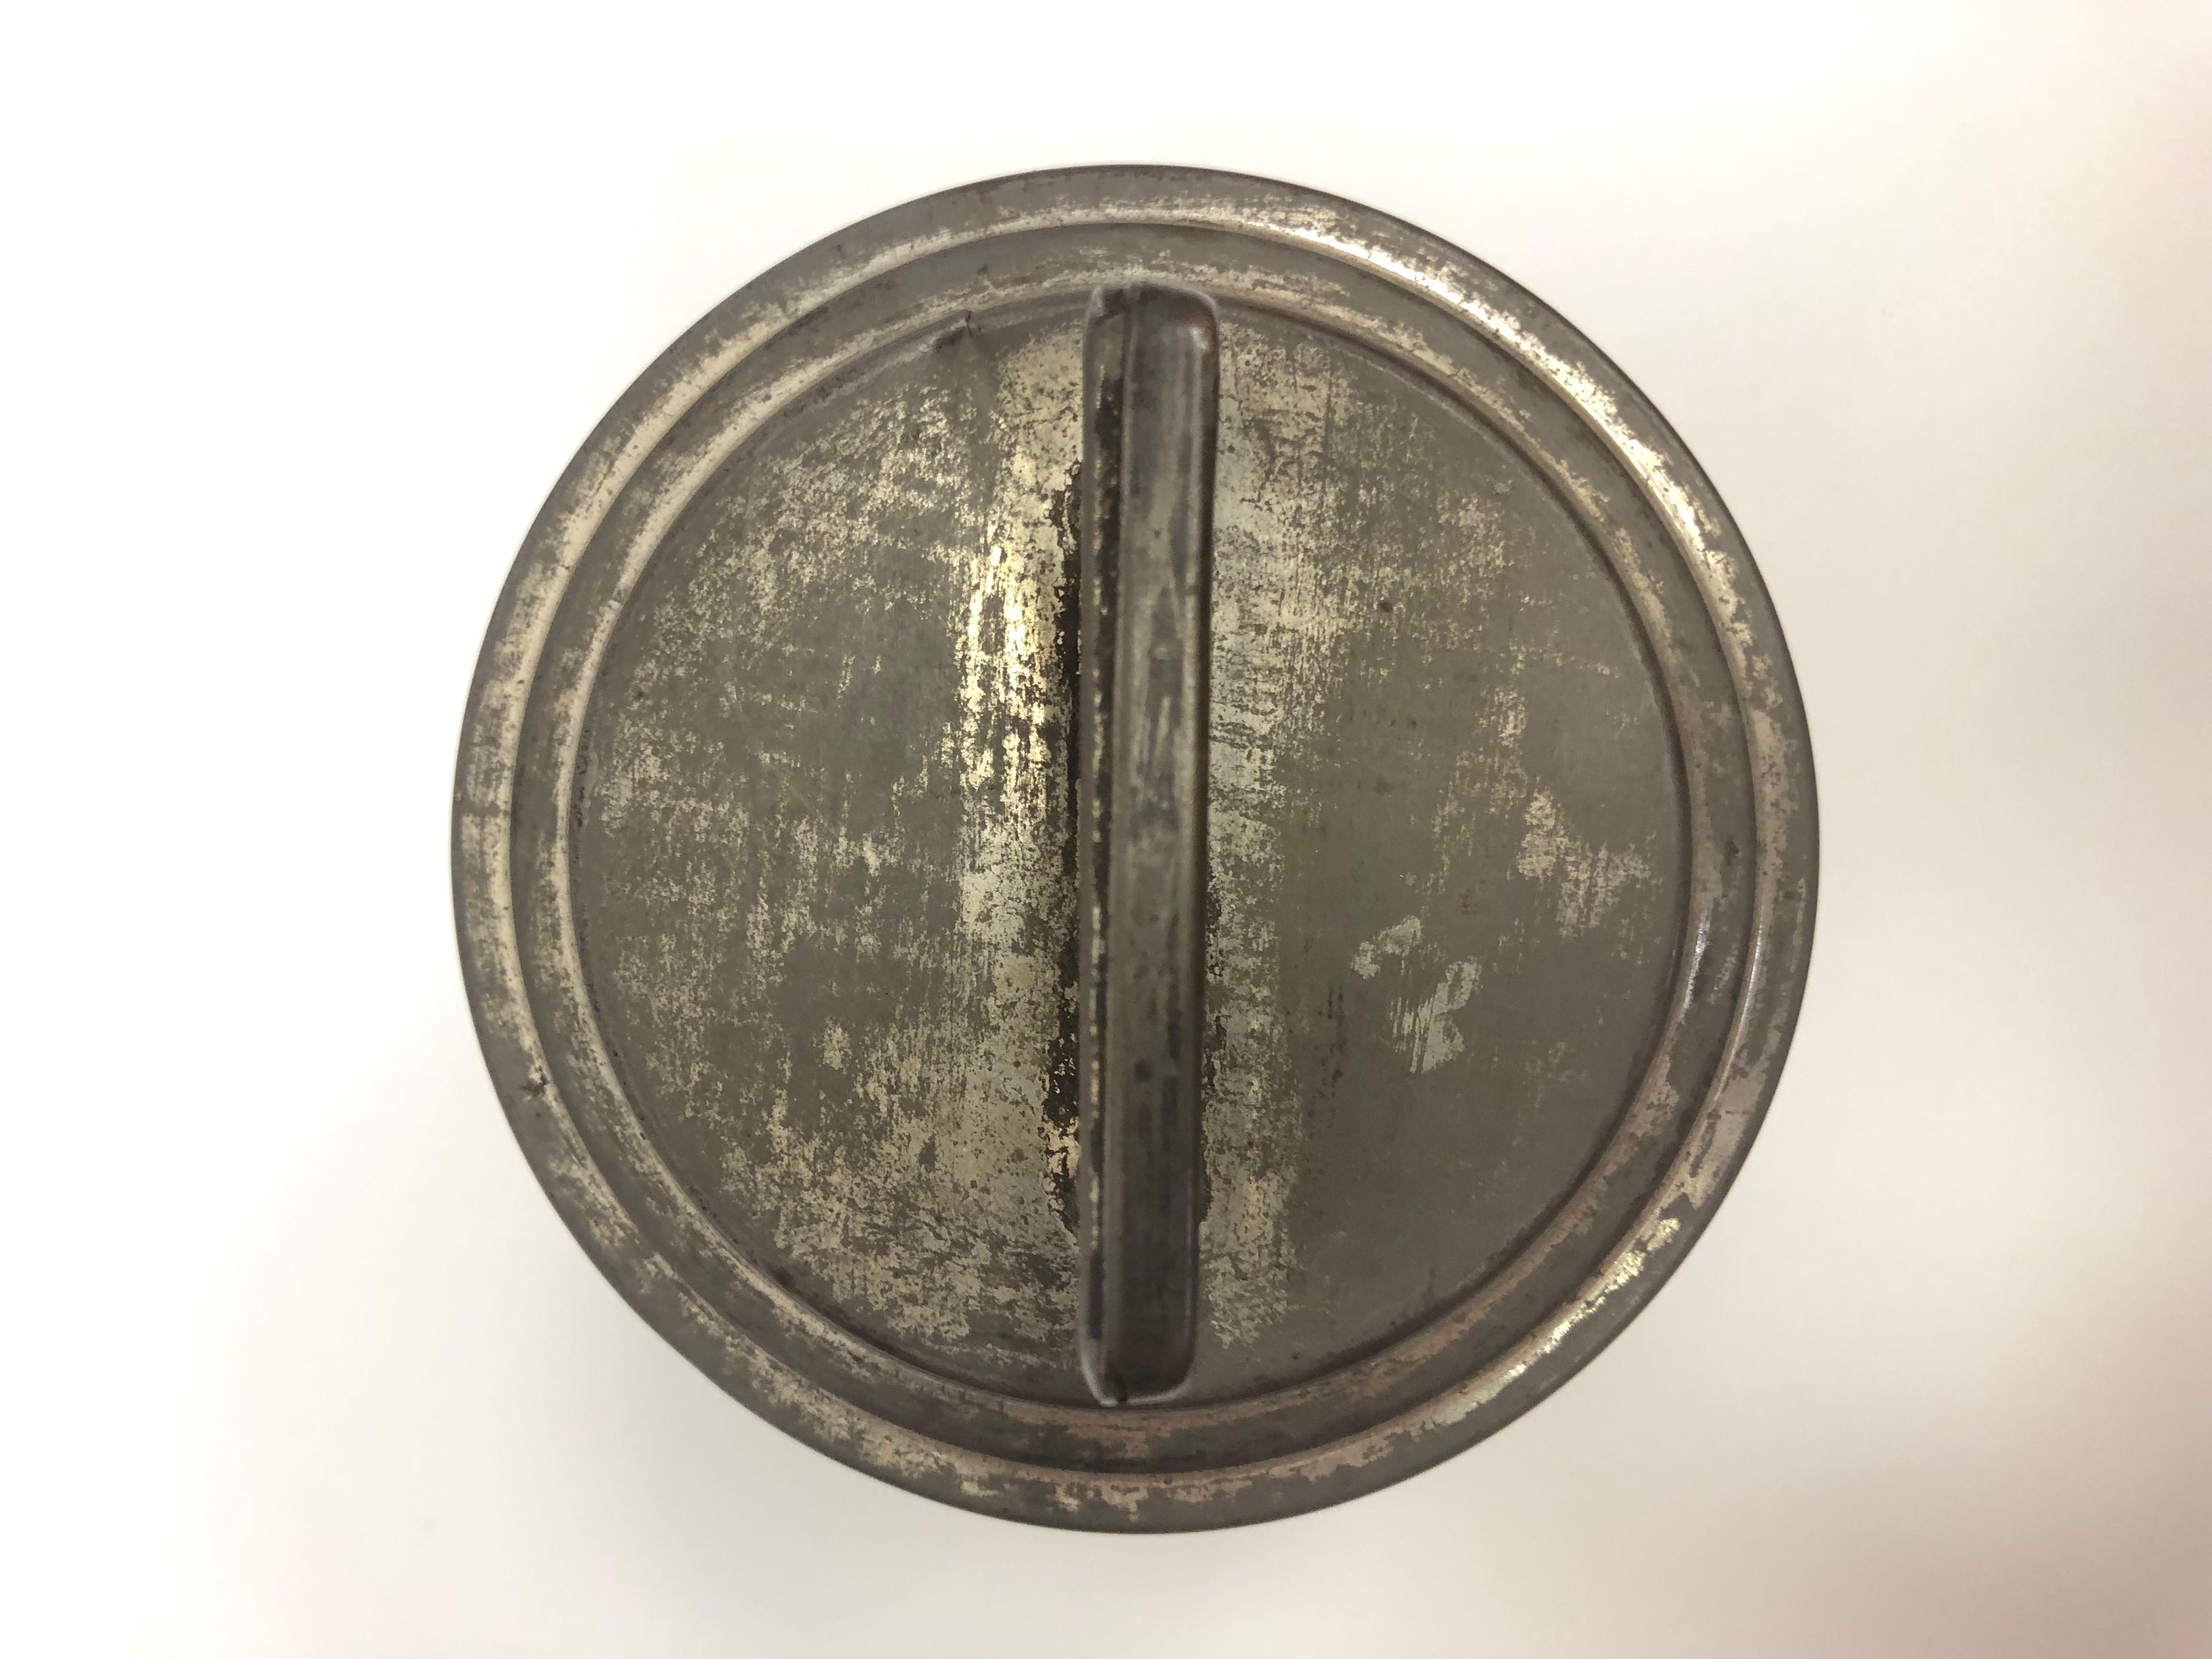 Very collectible Huntley and Palmer biscuit tin shaped like a bell with the motto When Ye Doe Ring, I Sweetly Sing. Marked on the bottom Reading and London, England. Dates to around 1912 and in good condition.